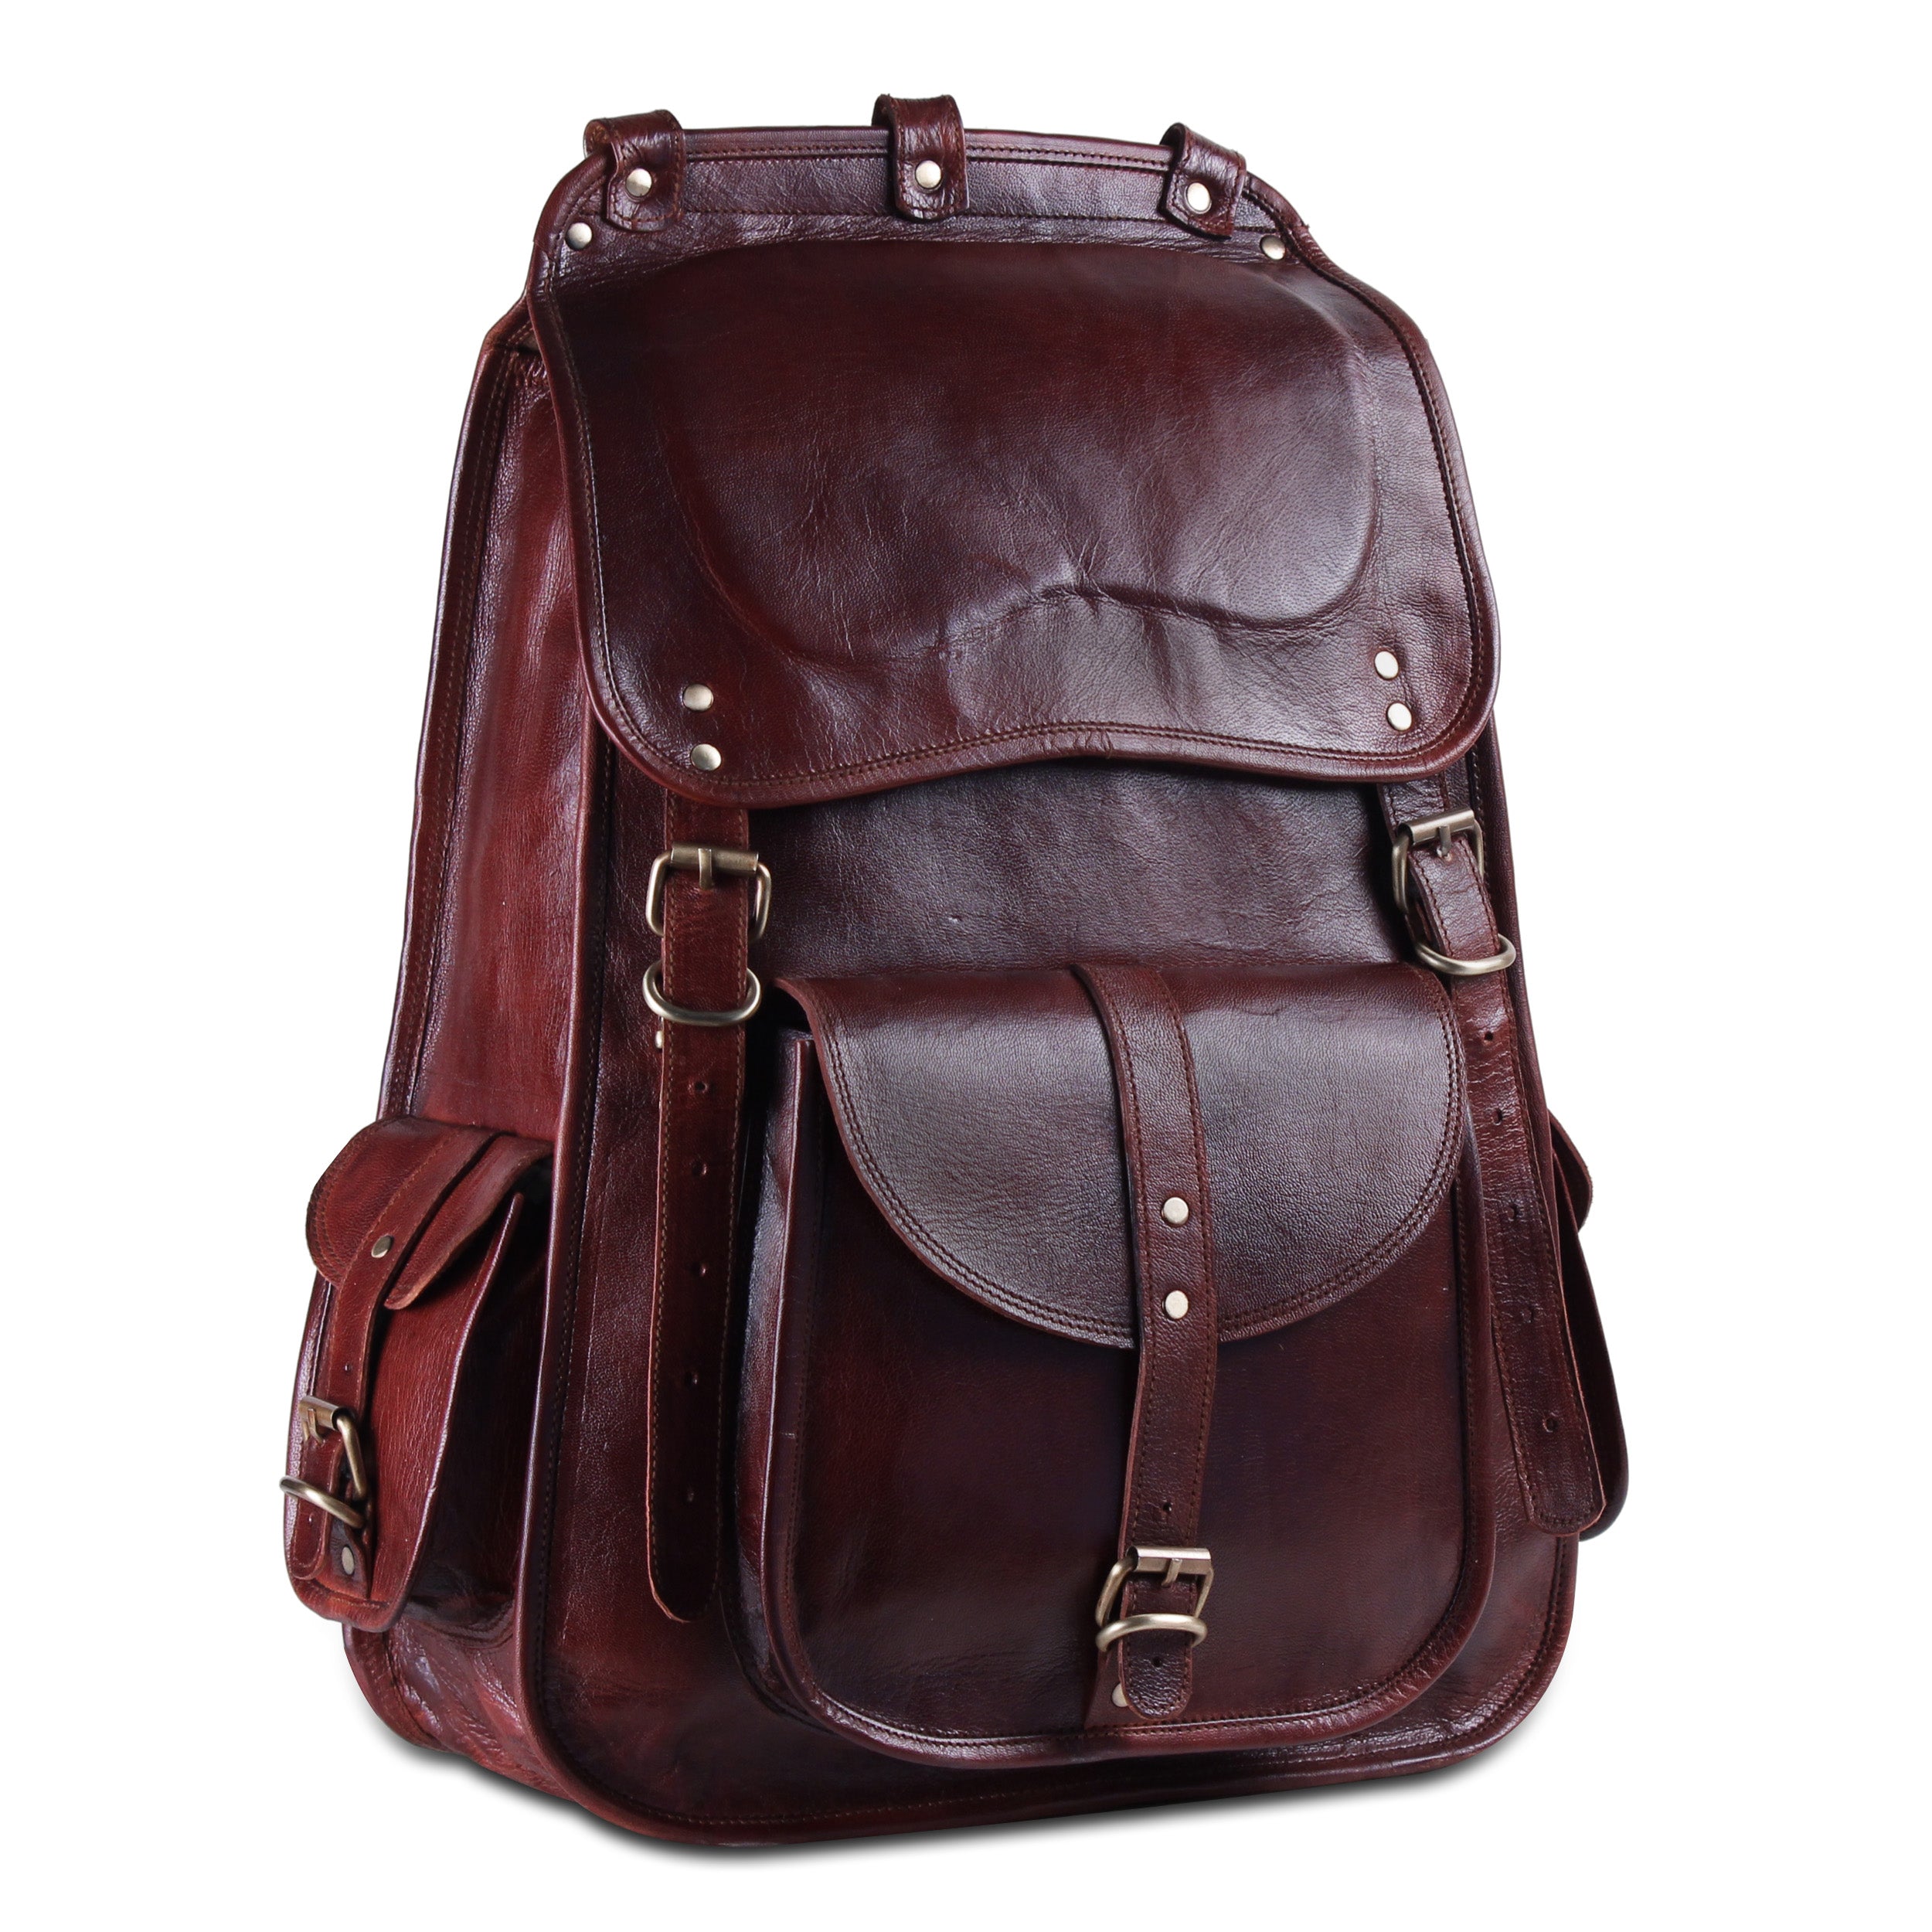 Brown Leather Backpack By Handmade World with Front and Side Pockets and White Background